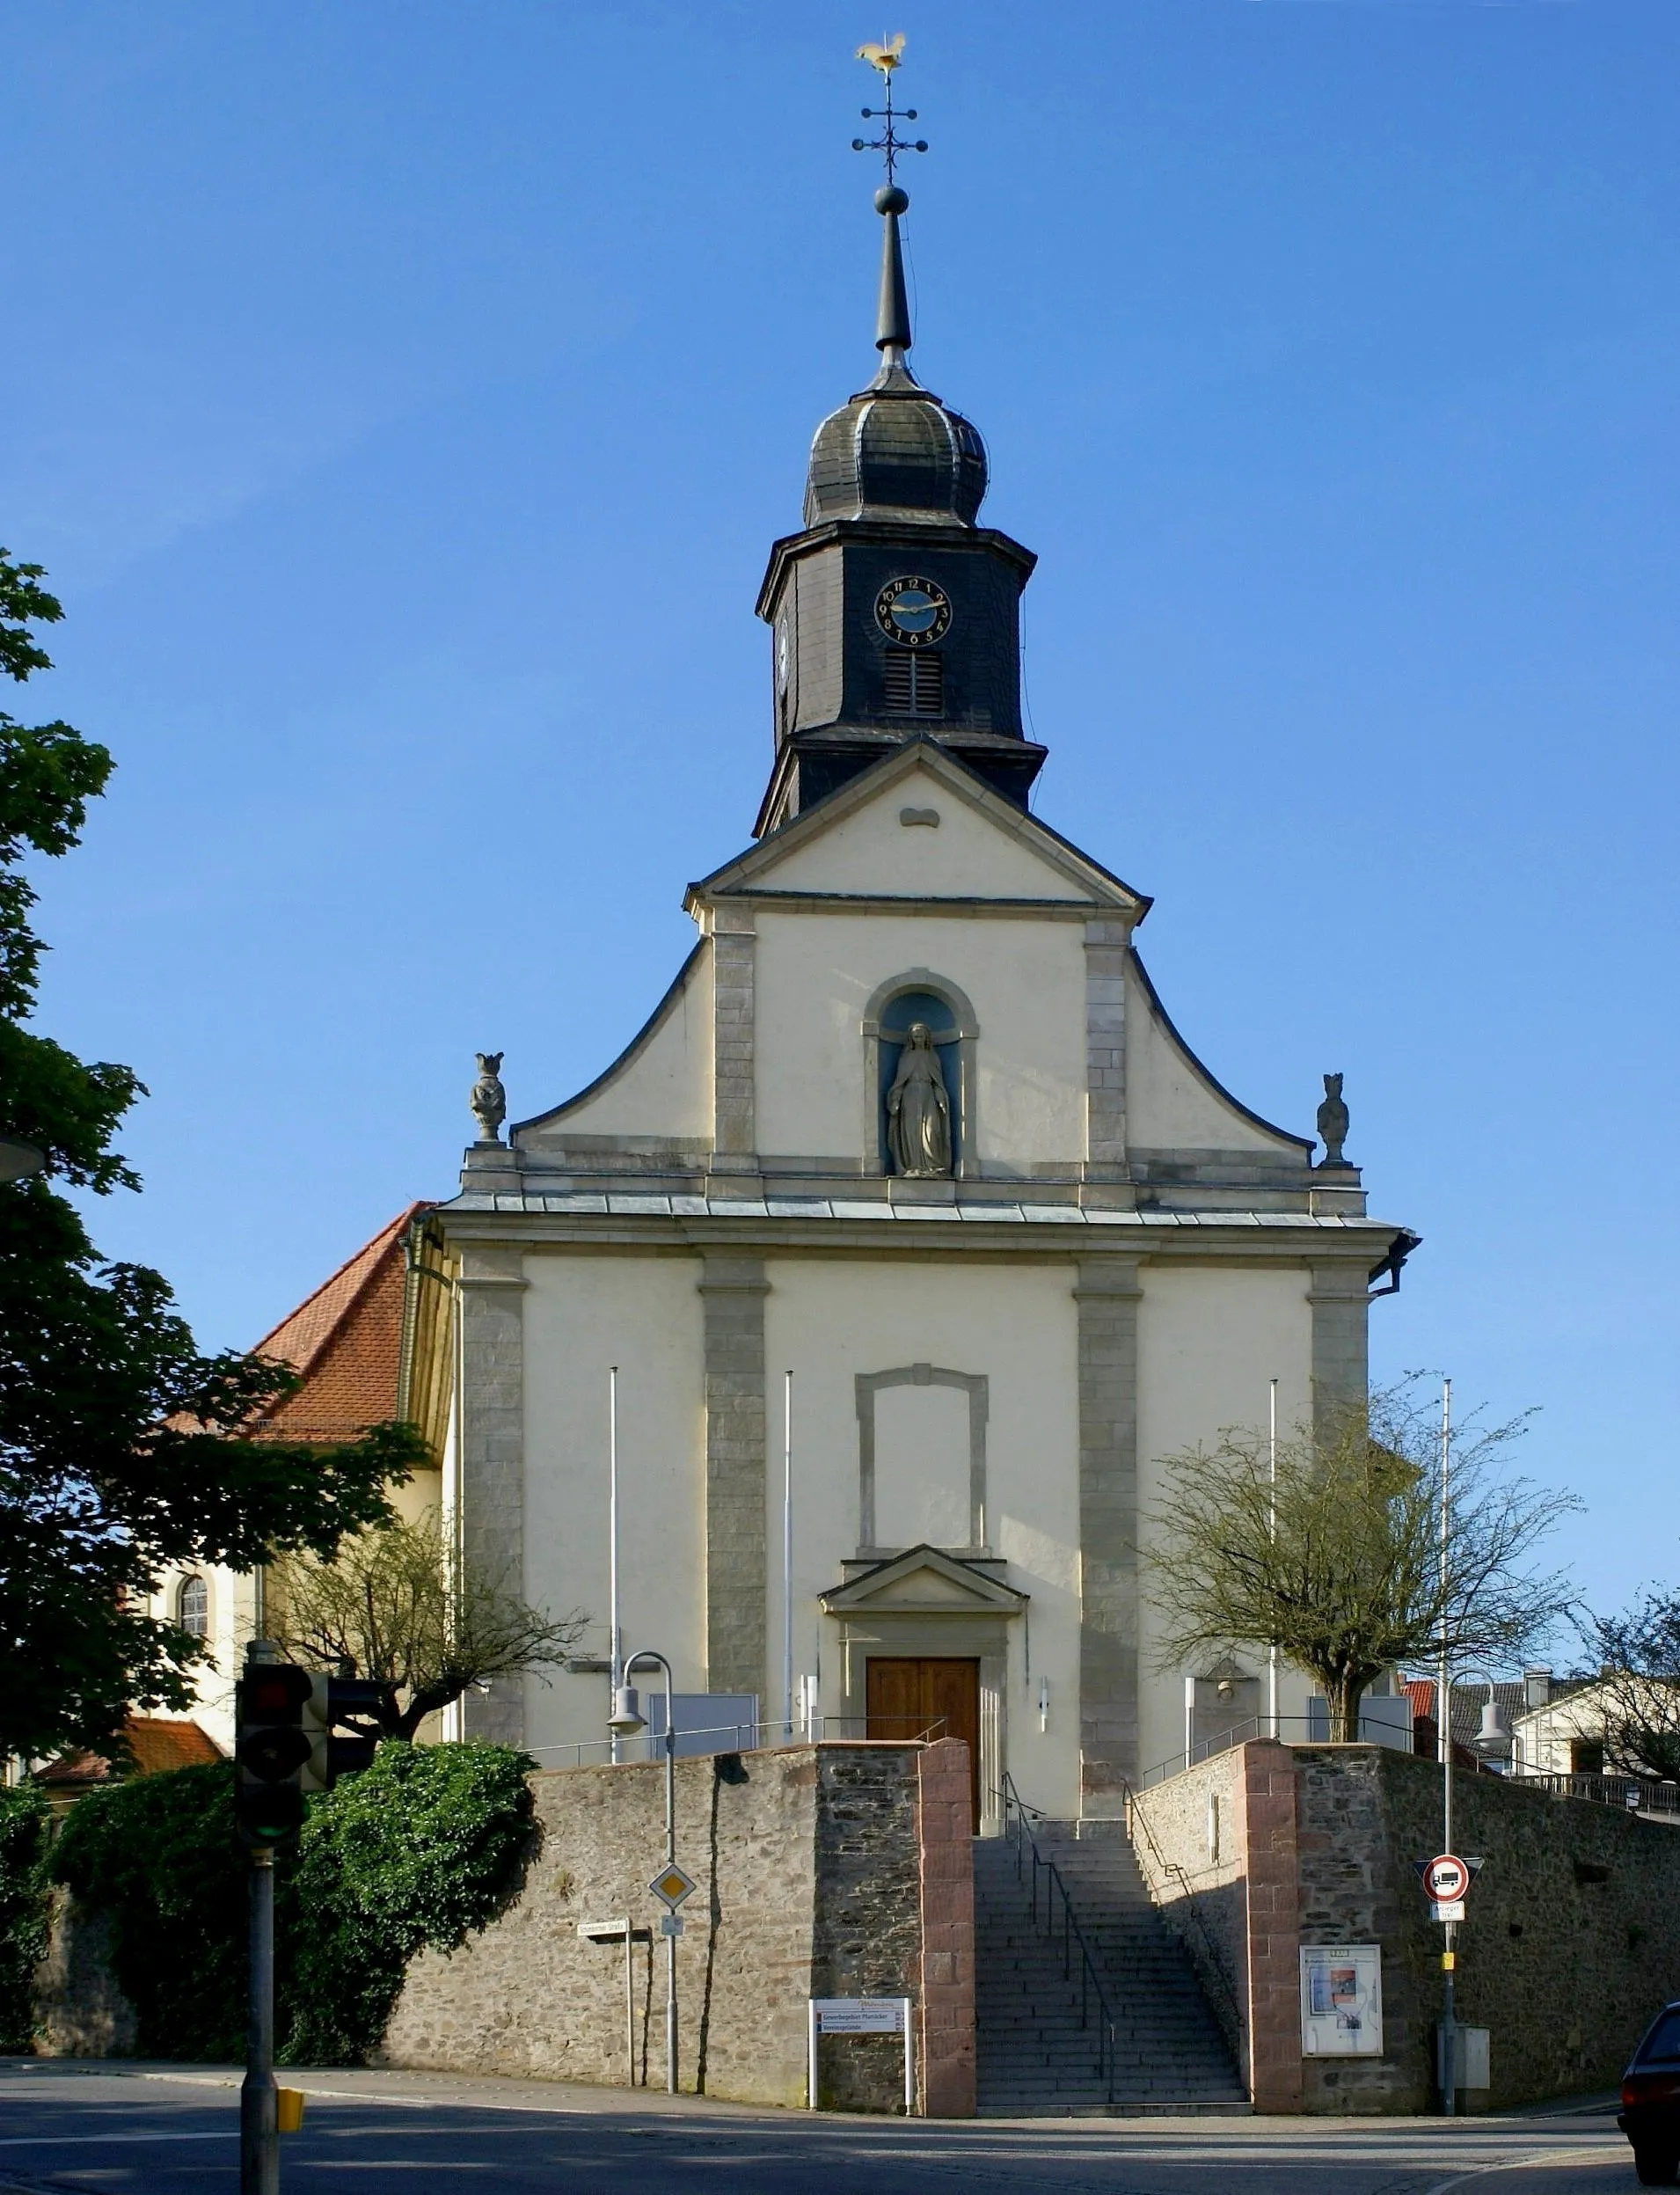 Photo showing: The imposing front of the parish church St. Cyriakus in Mömbris.